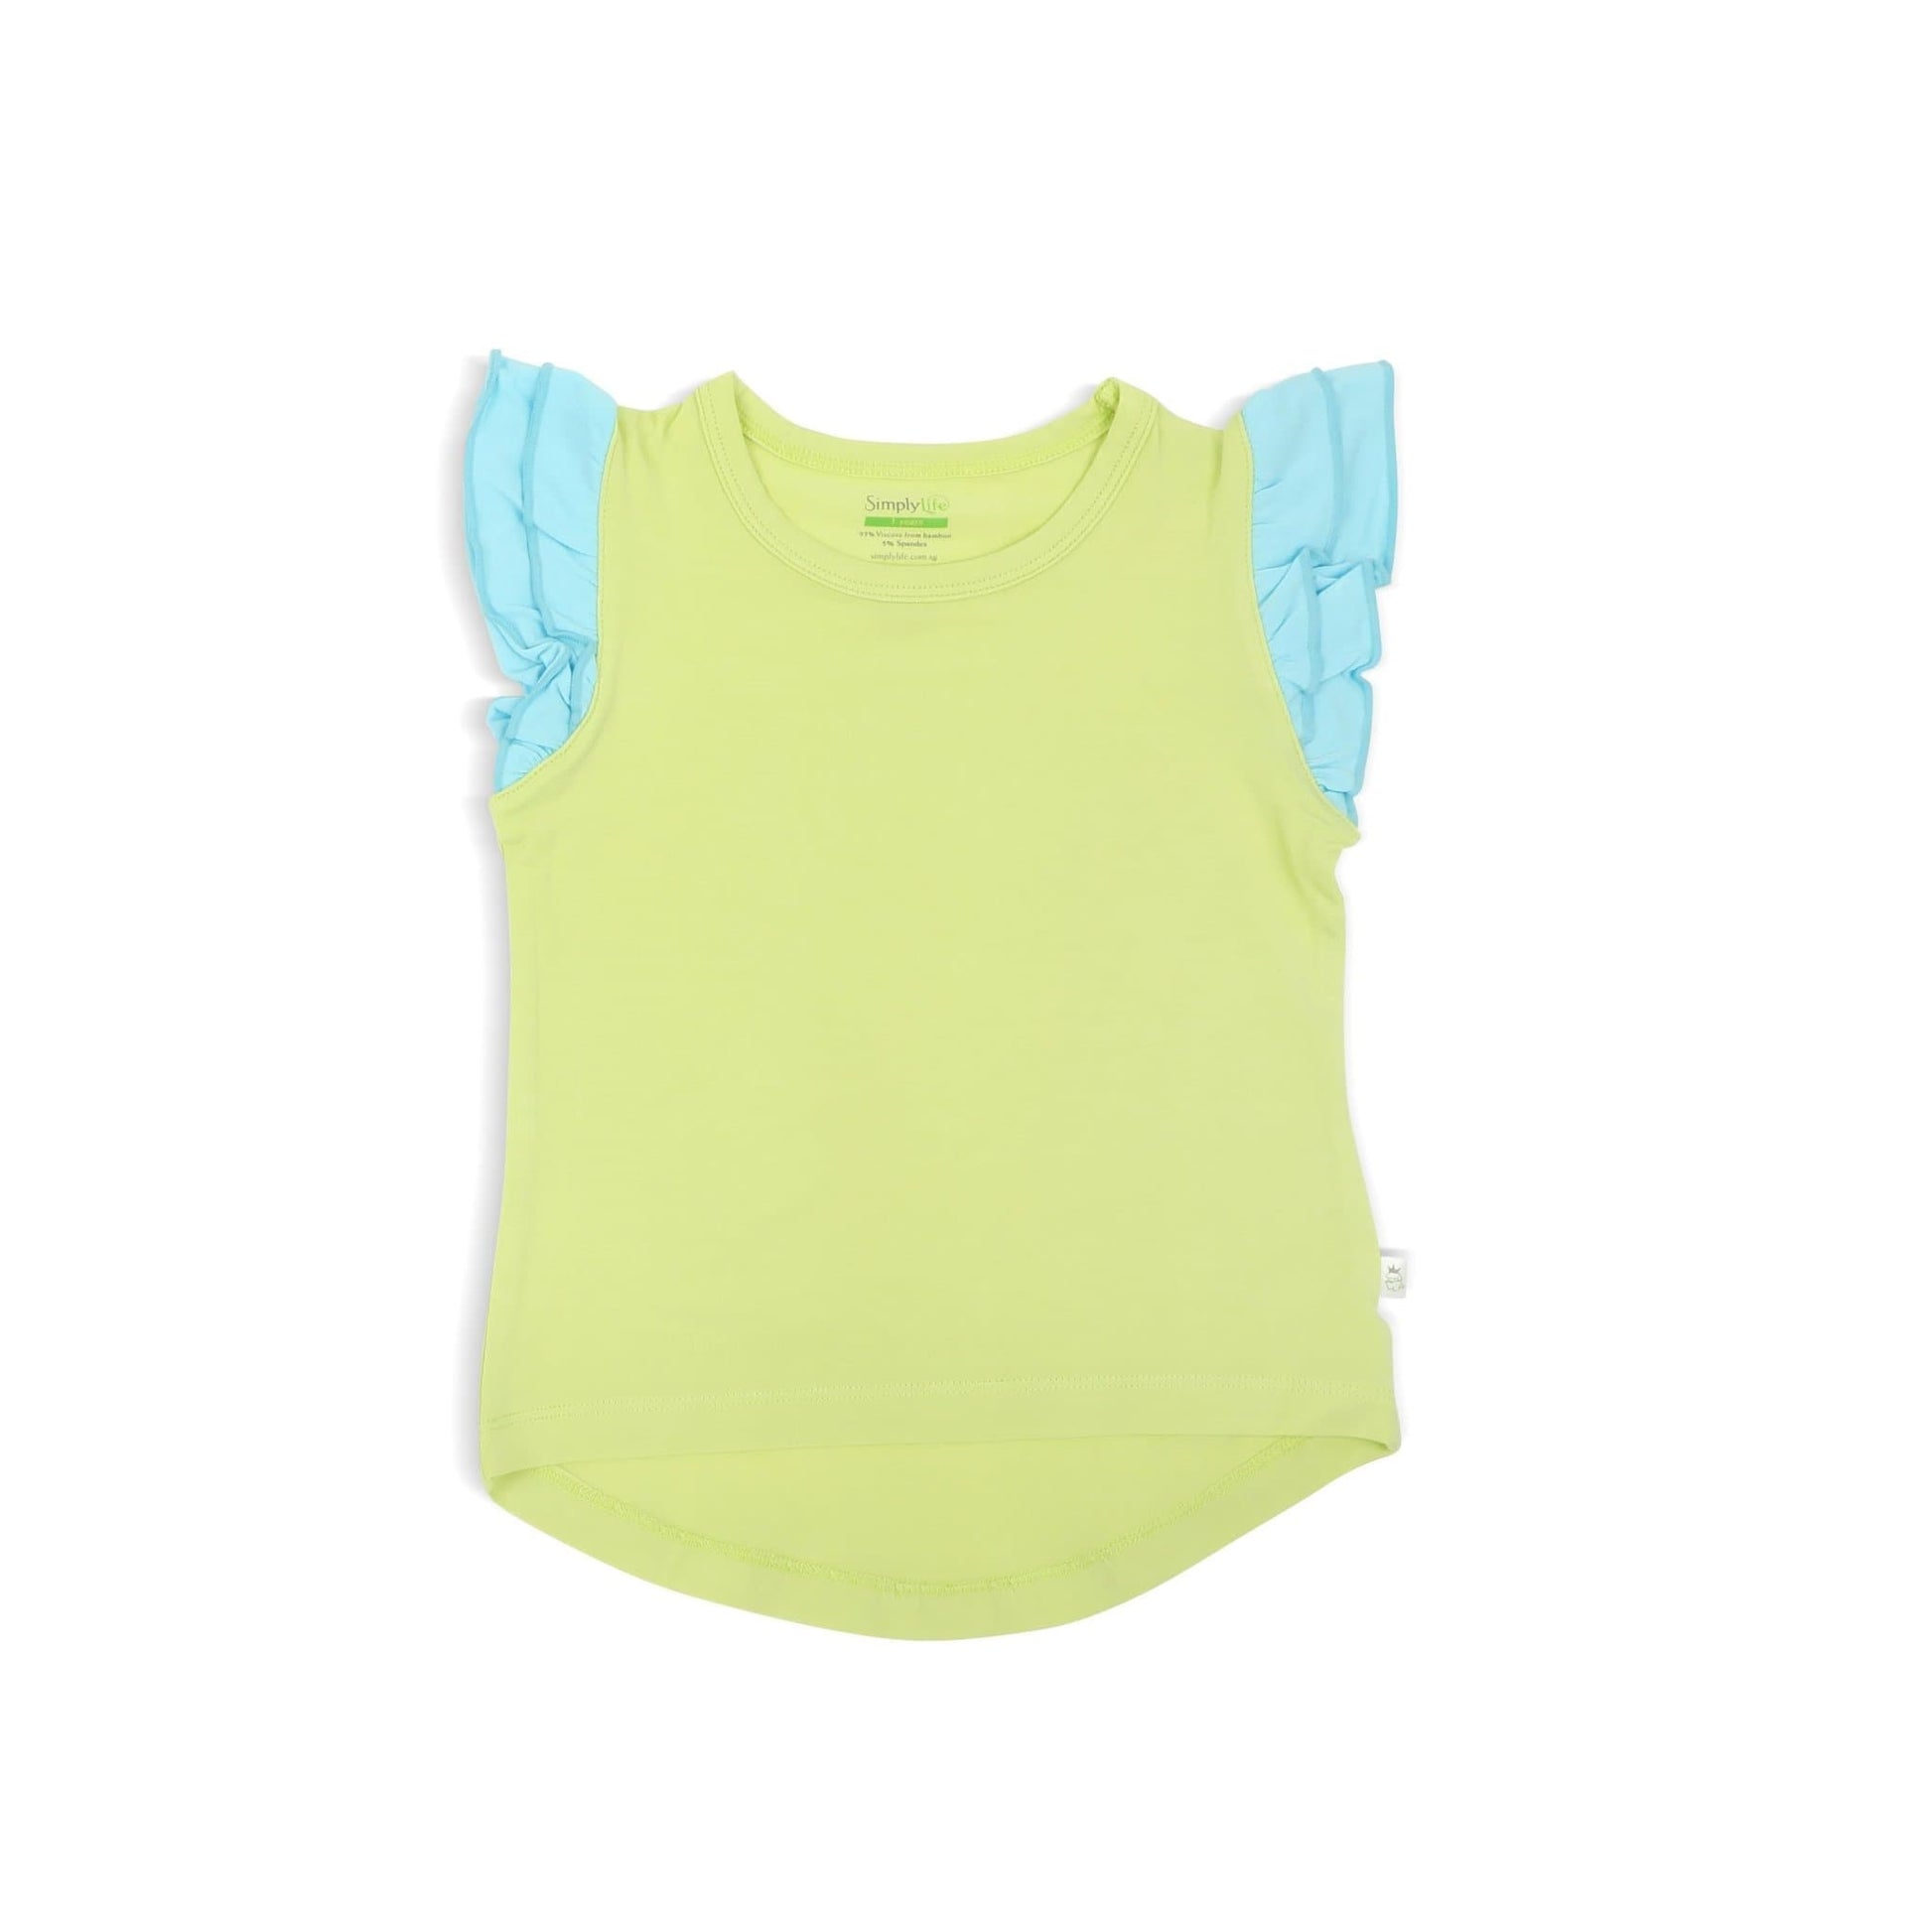 Girls' Frilled Tee - Simply Life